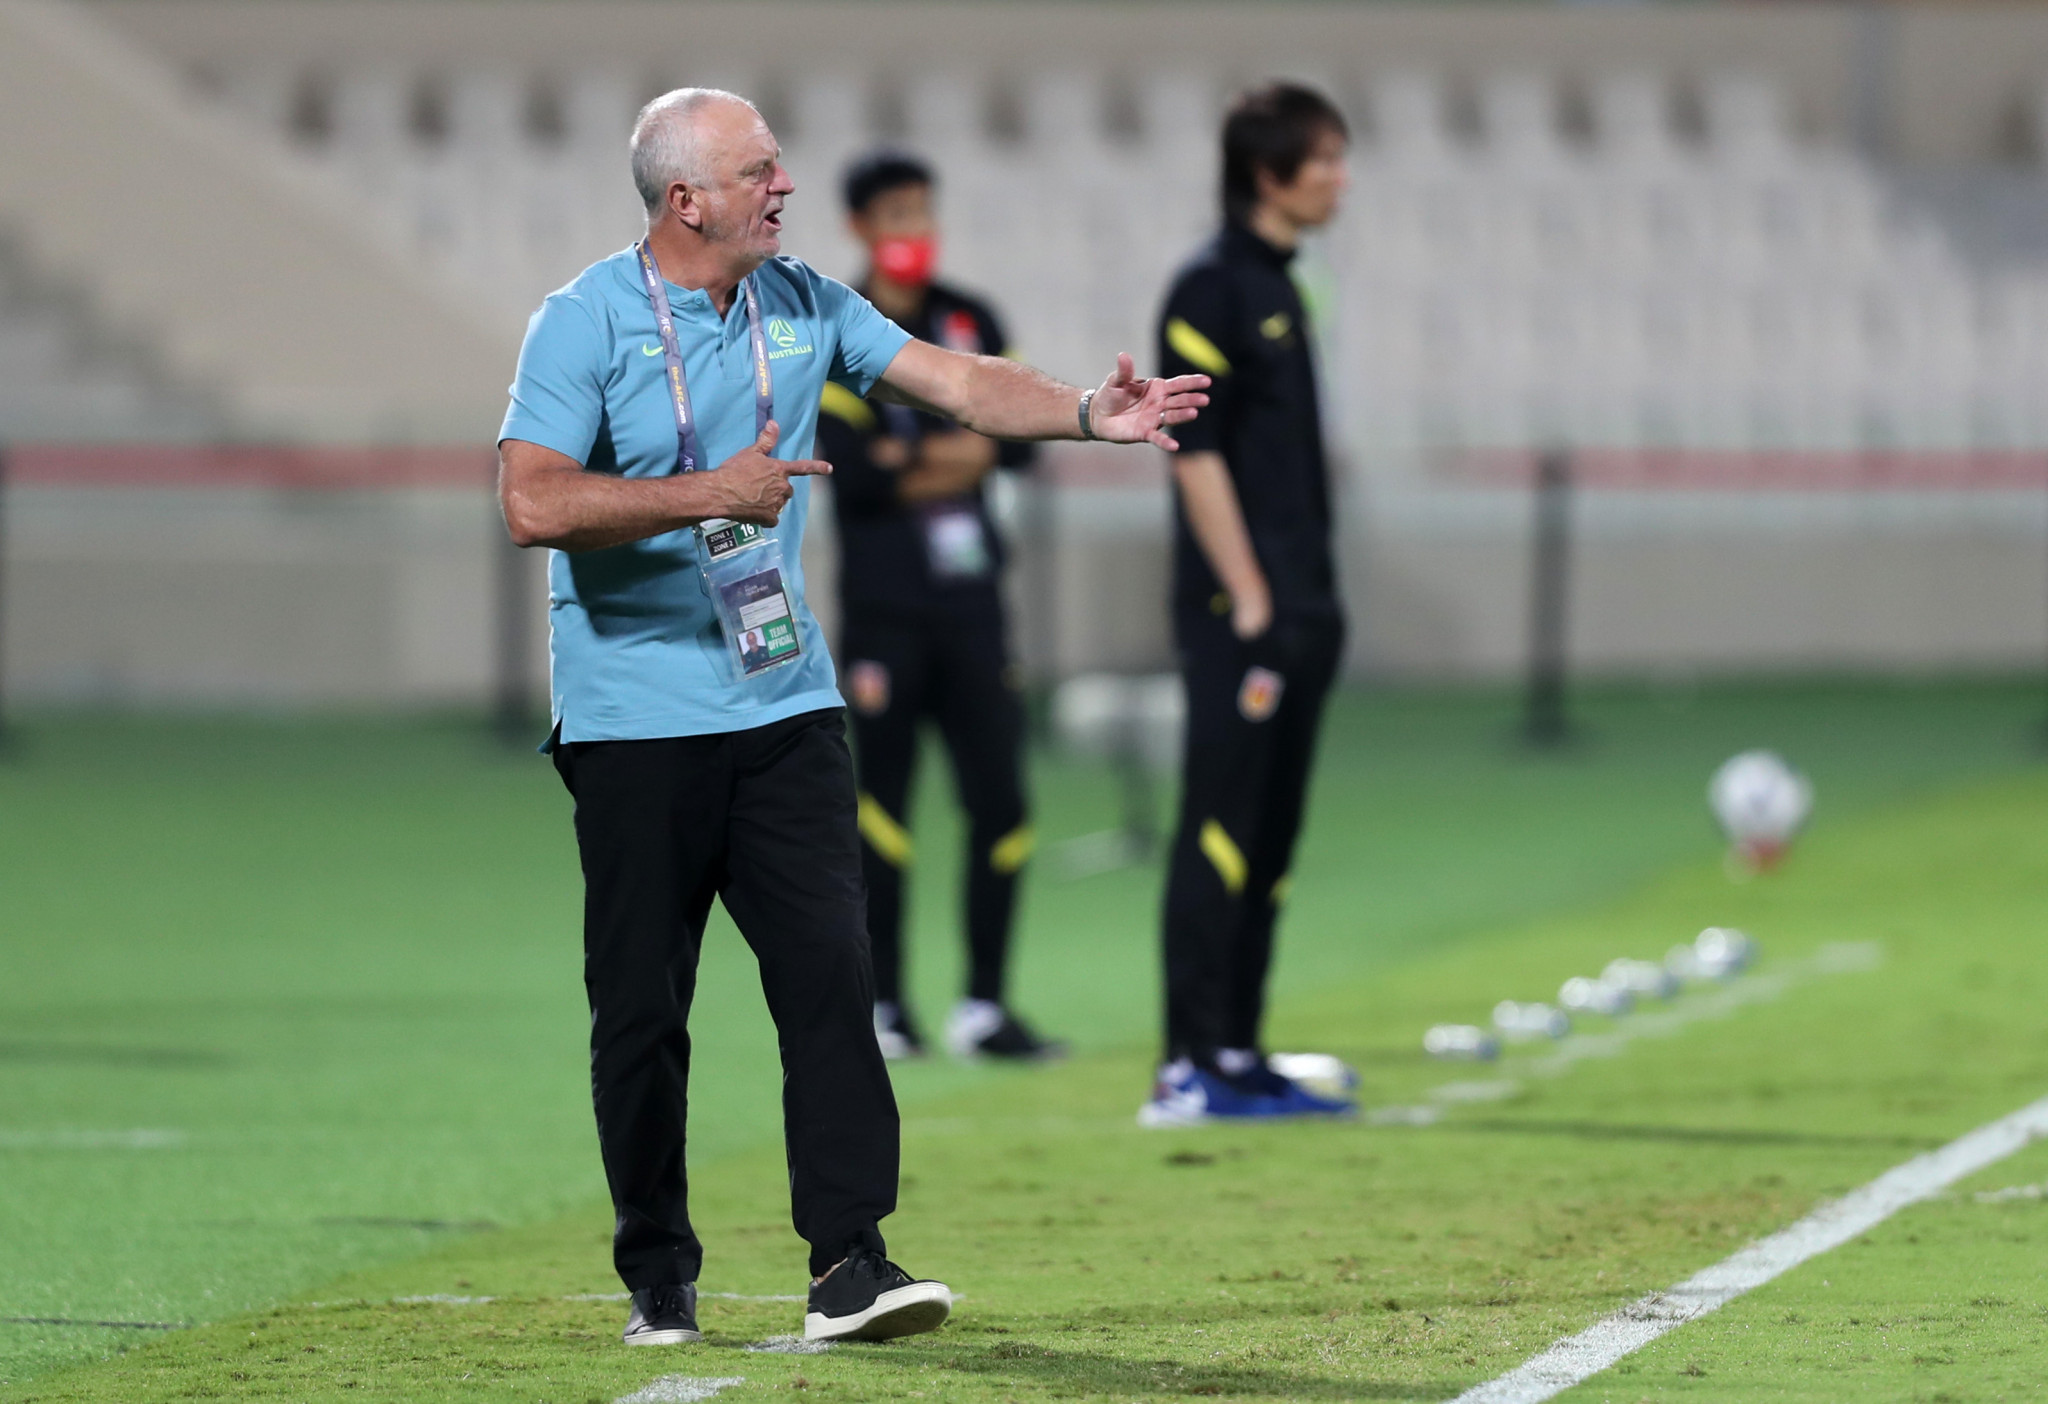 Graham Arnold is seeking to guide Australia to its fifth consecutive FIFA World Cup but preparations have been overshadowed after he broke COVID-19 self-isolation rules ©Getty Images